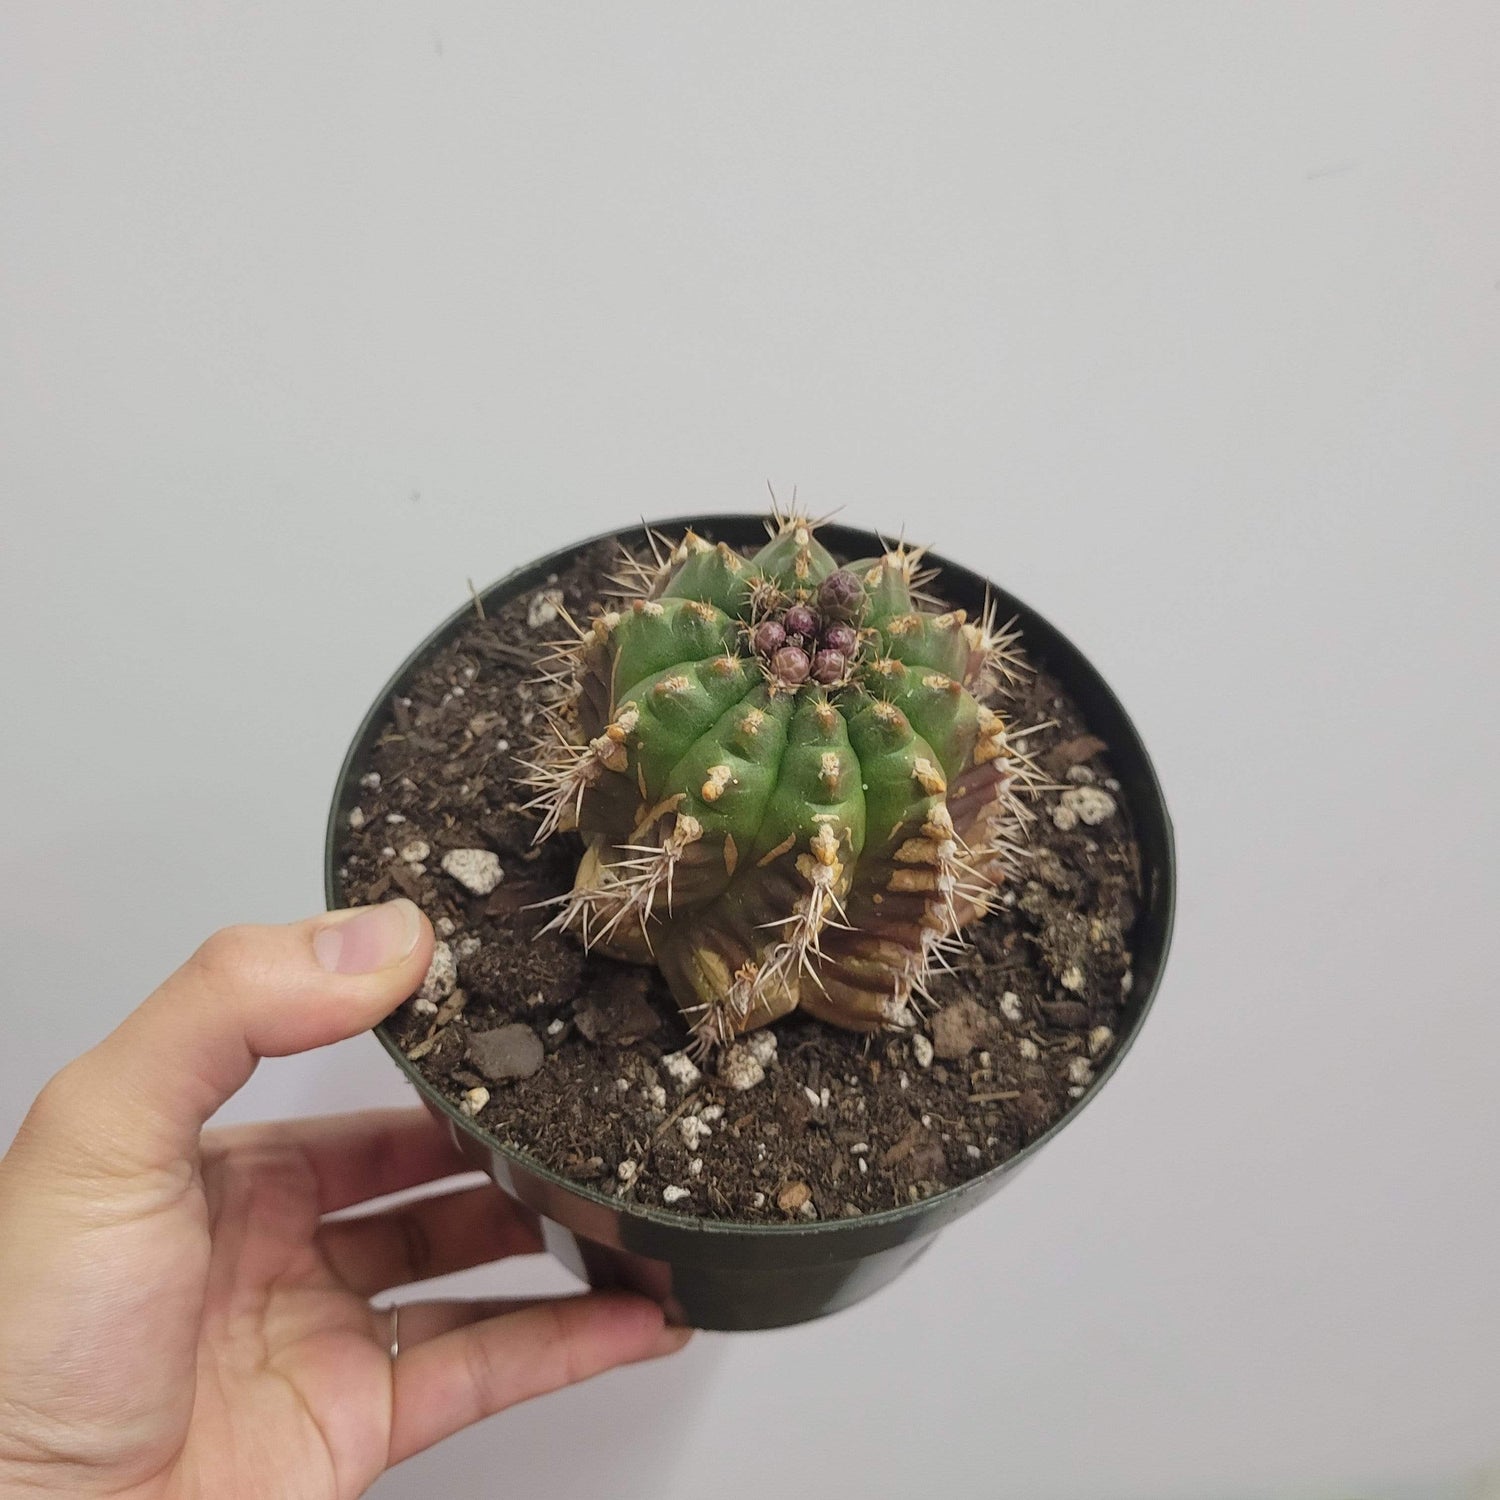 Urban Sprouts Plant 6" in nursery pot Cactus 'Chin'